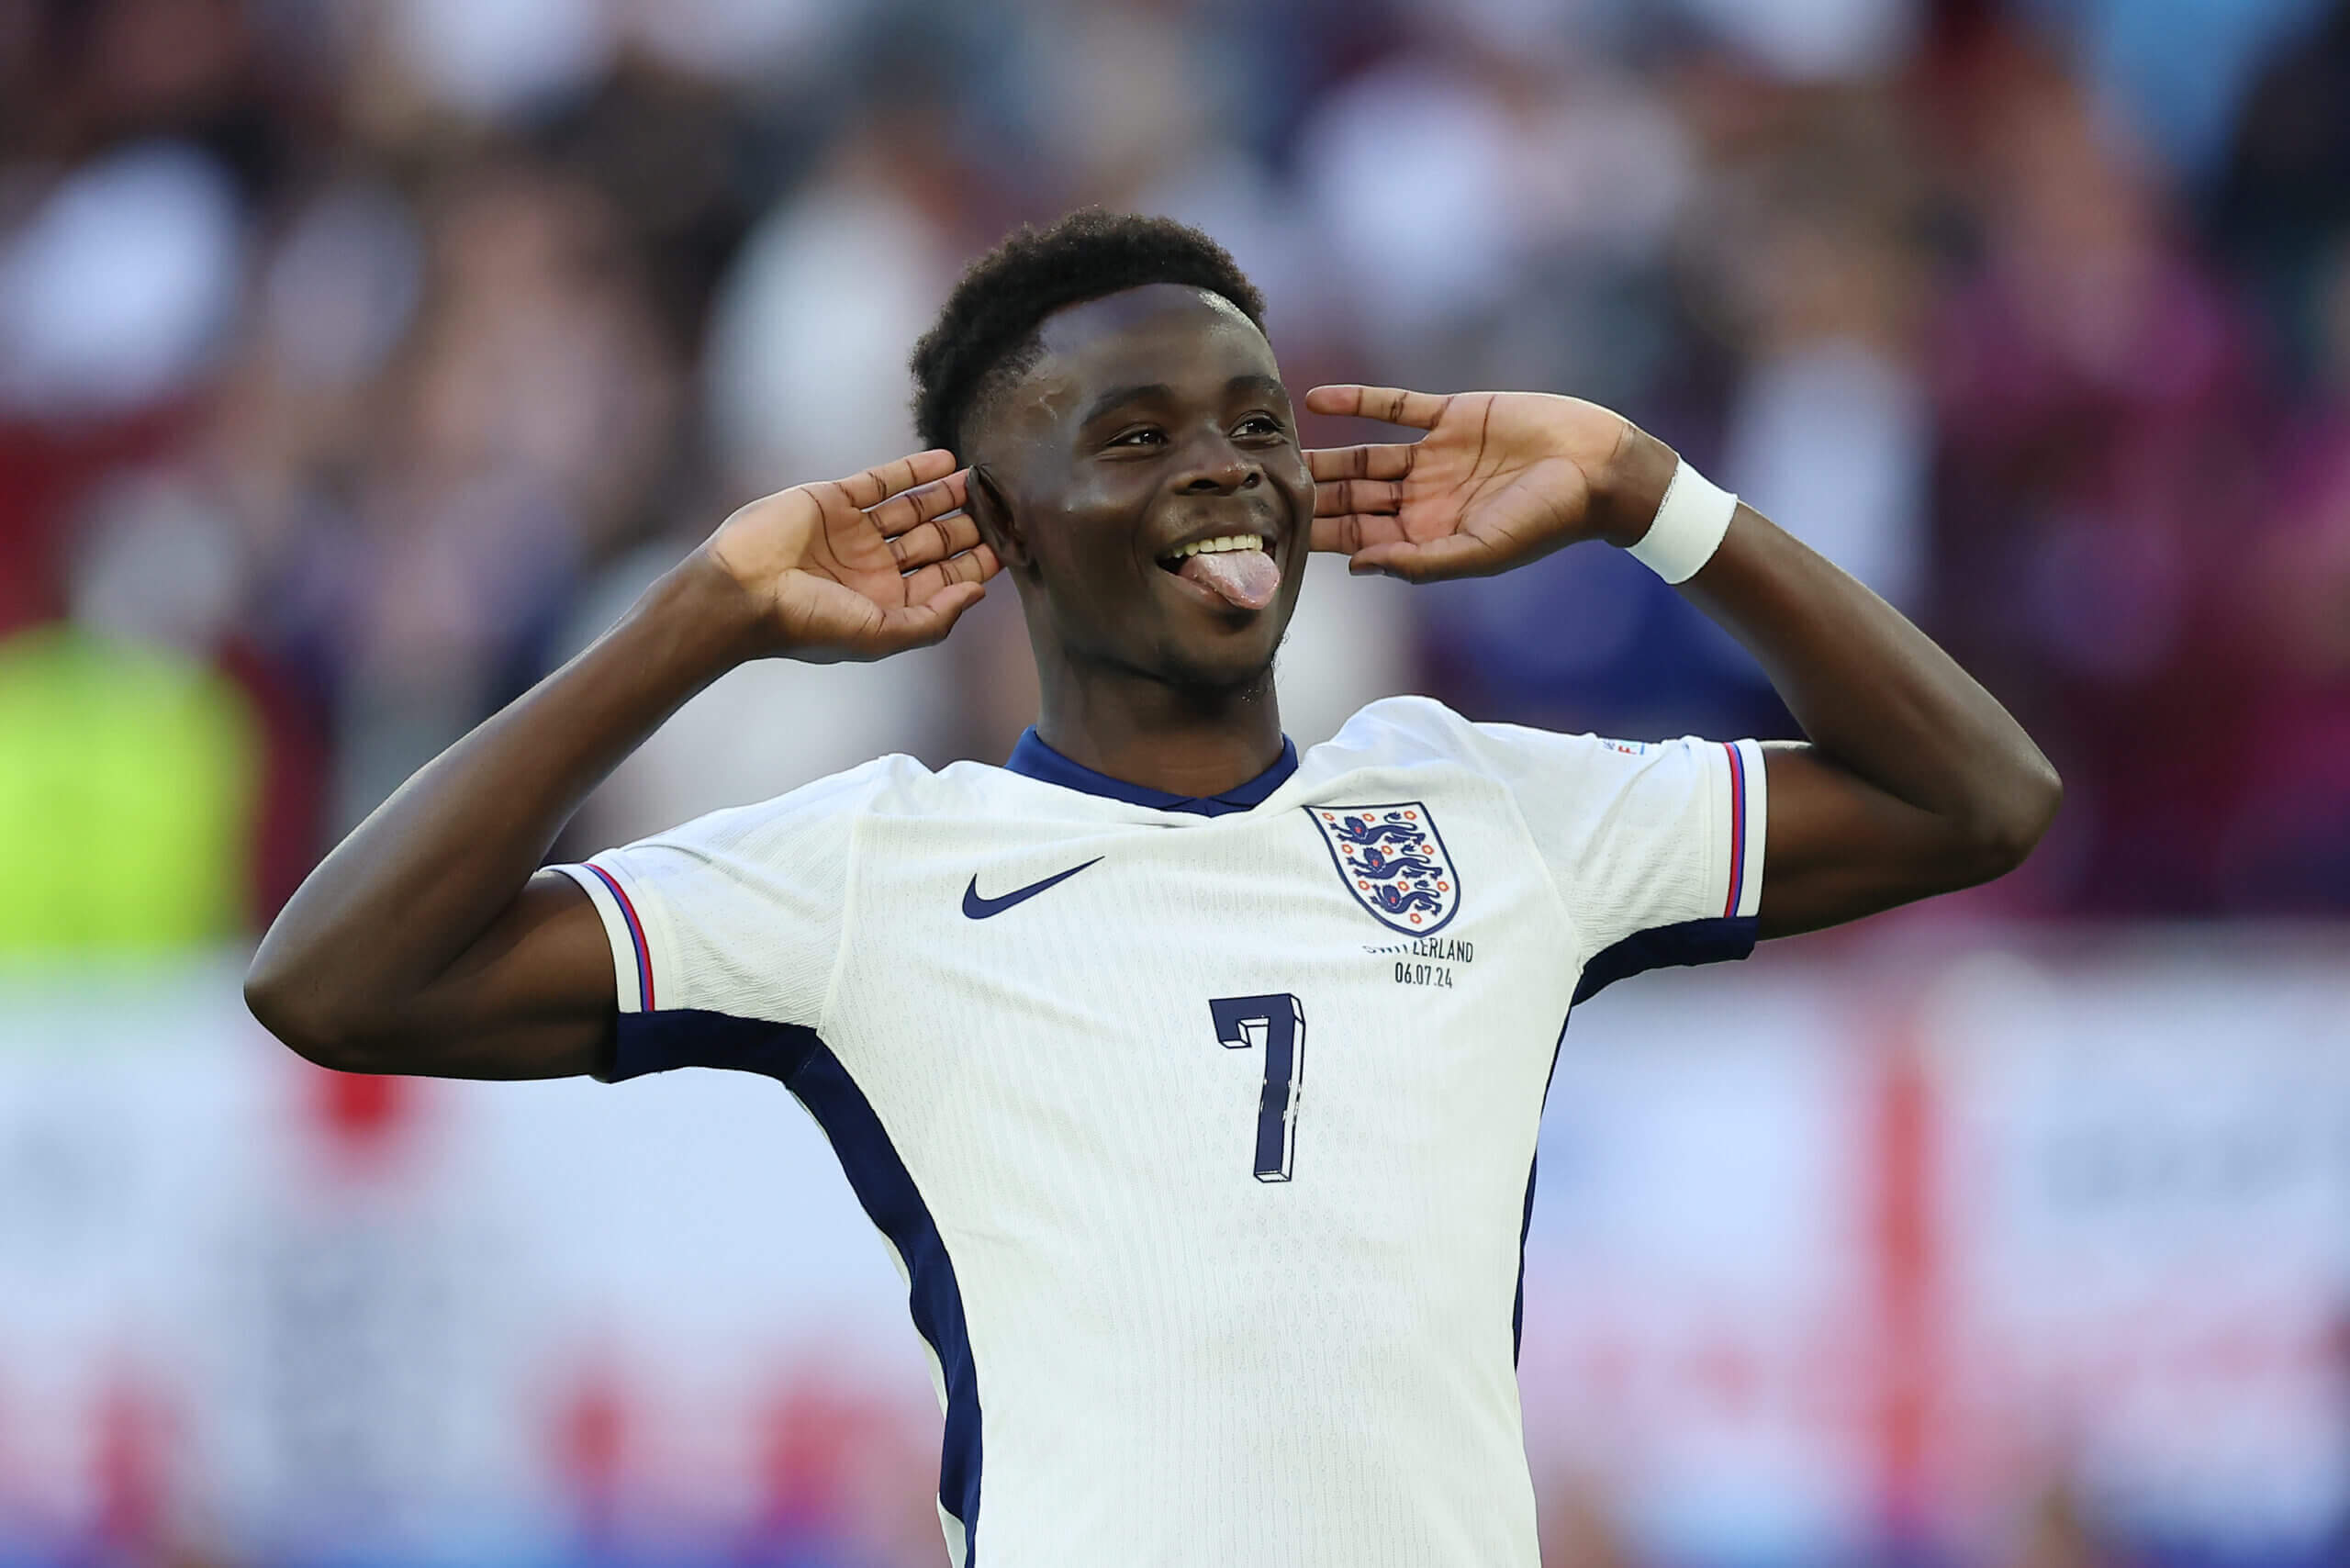 England's Starboy: Why fans gave Saka a nickname he avoids using himself